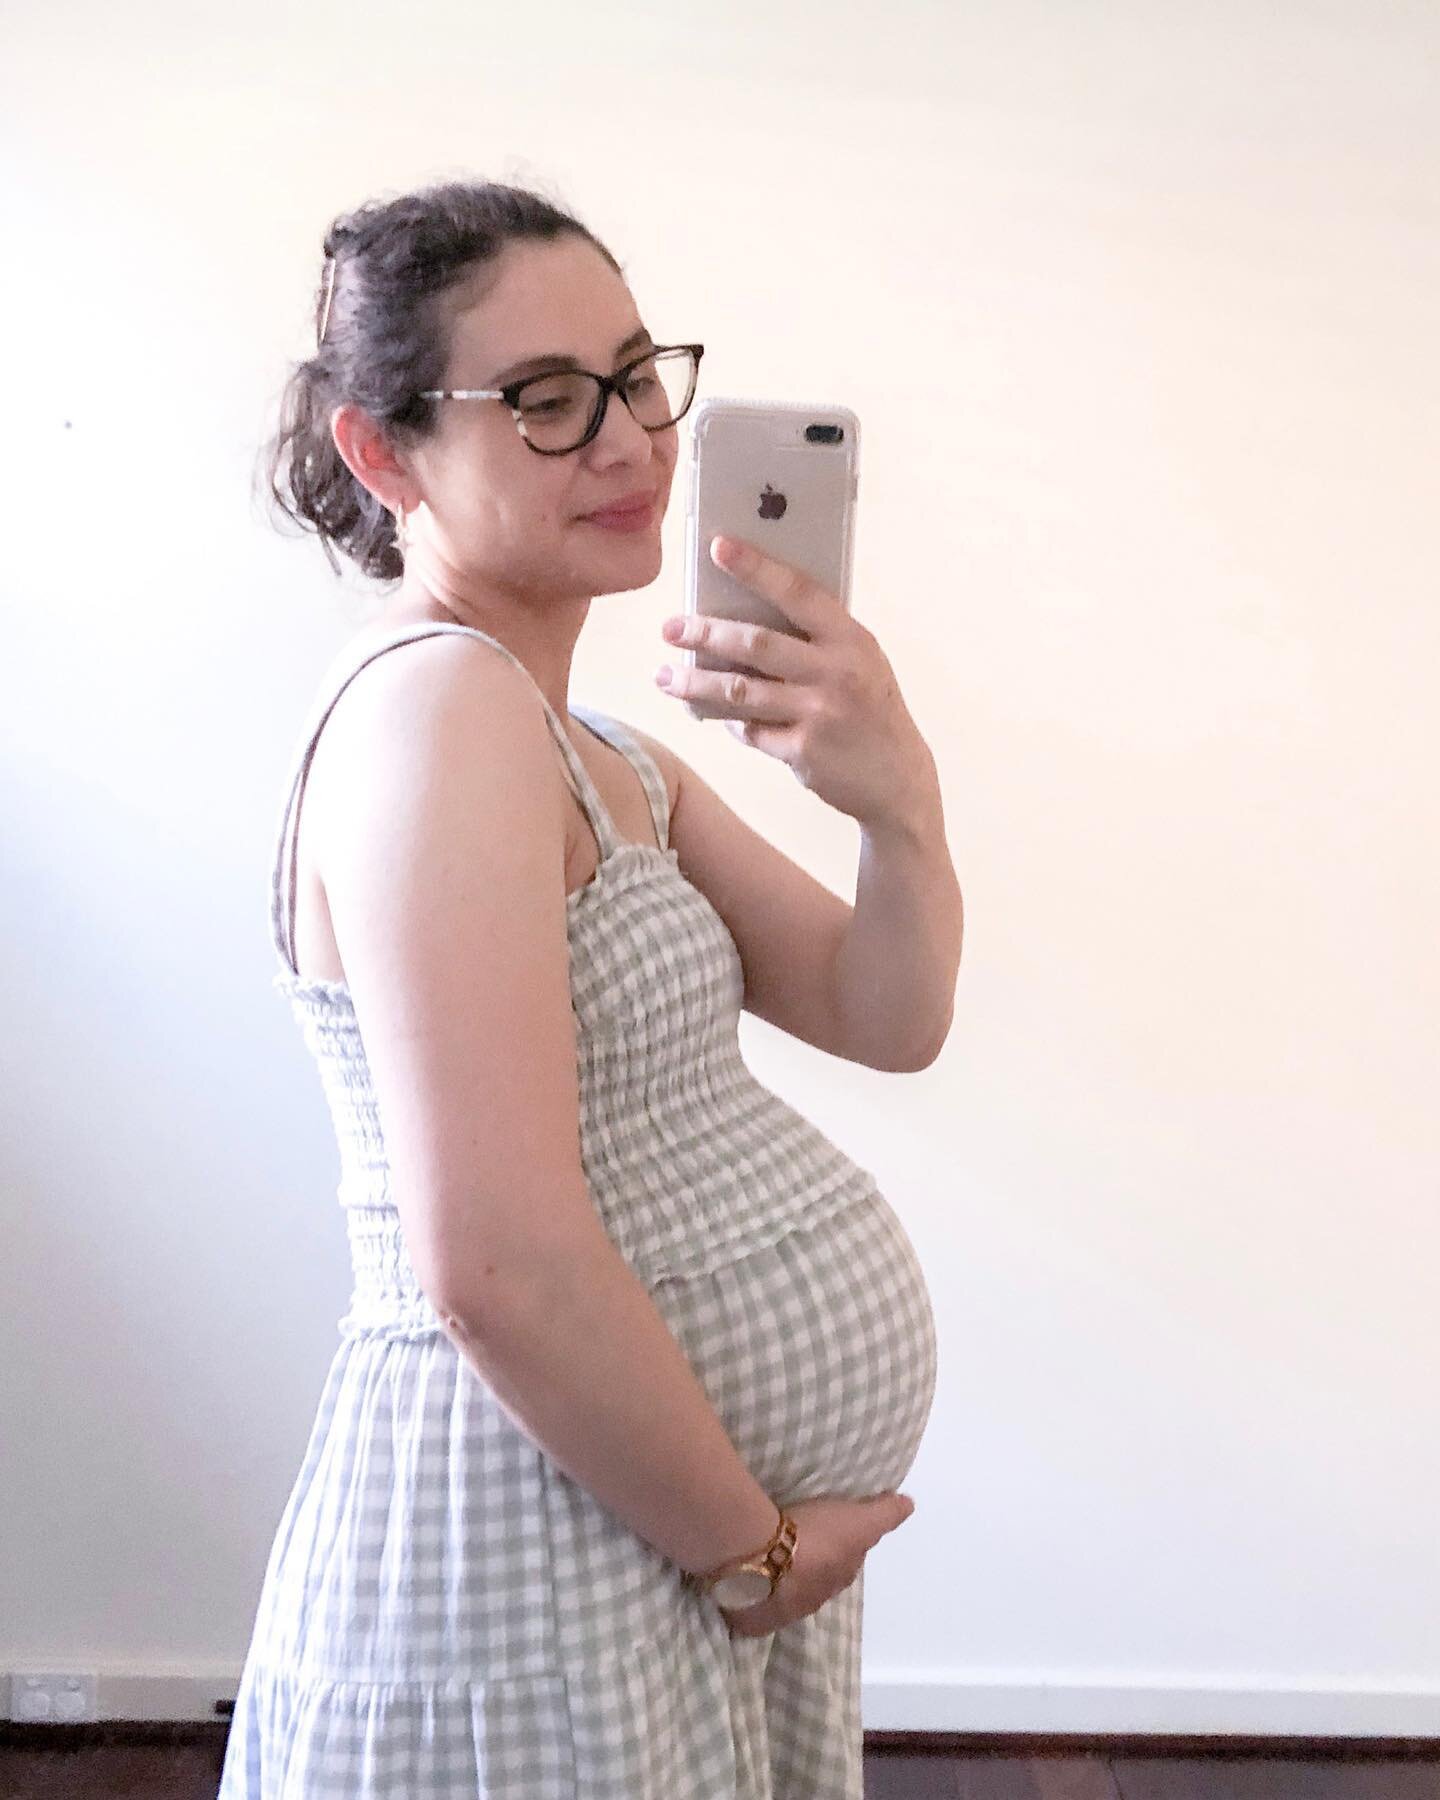 Christmas Day #bumpstyle at #34weeks 😛
.
Stumbled upon this beautiful gingham dress from @ghandaclothing . I&rsquo;ve been looking for something like this for ages - the print and colour is just what I was wanting and the style is so comfortable - e